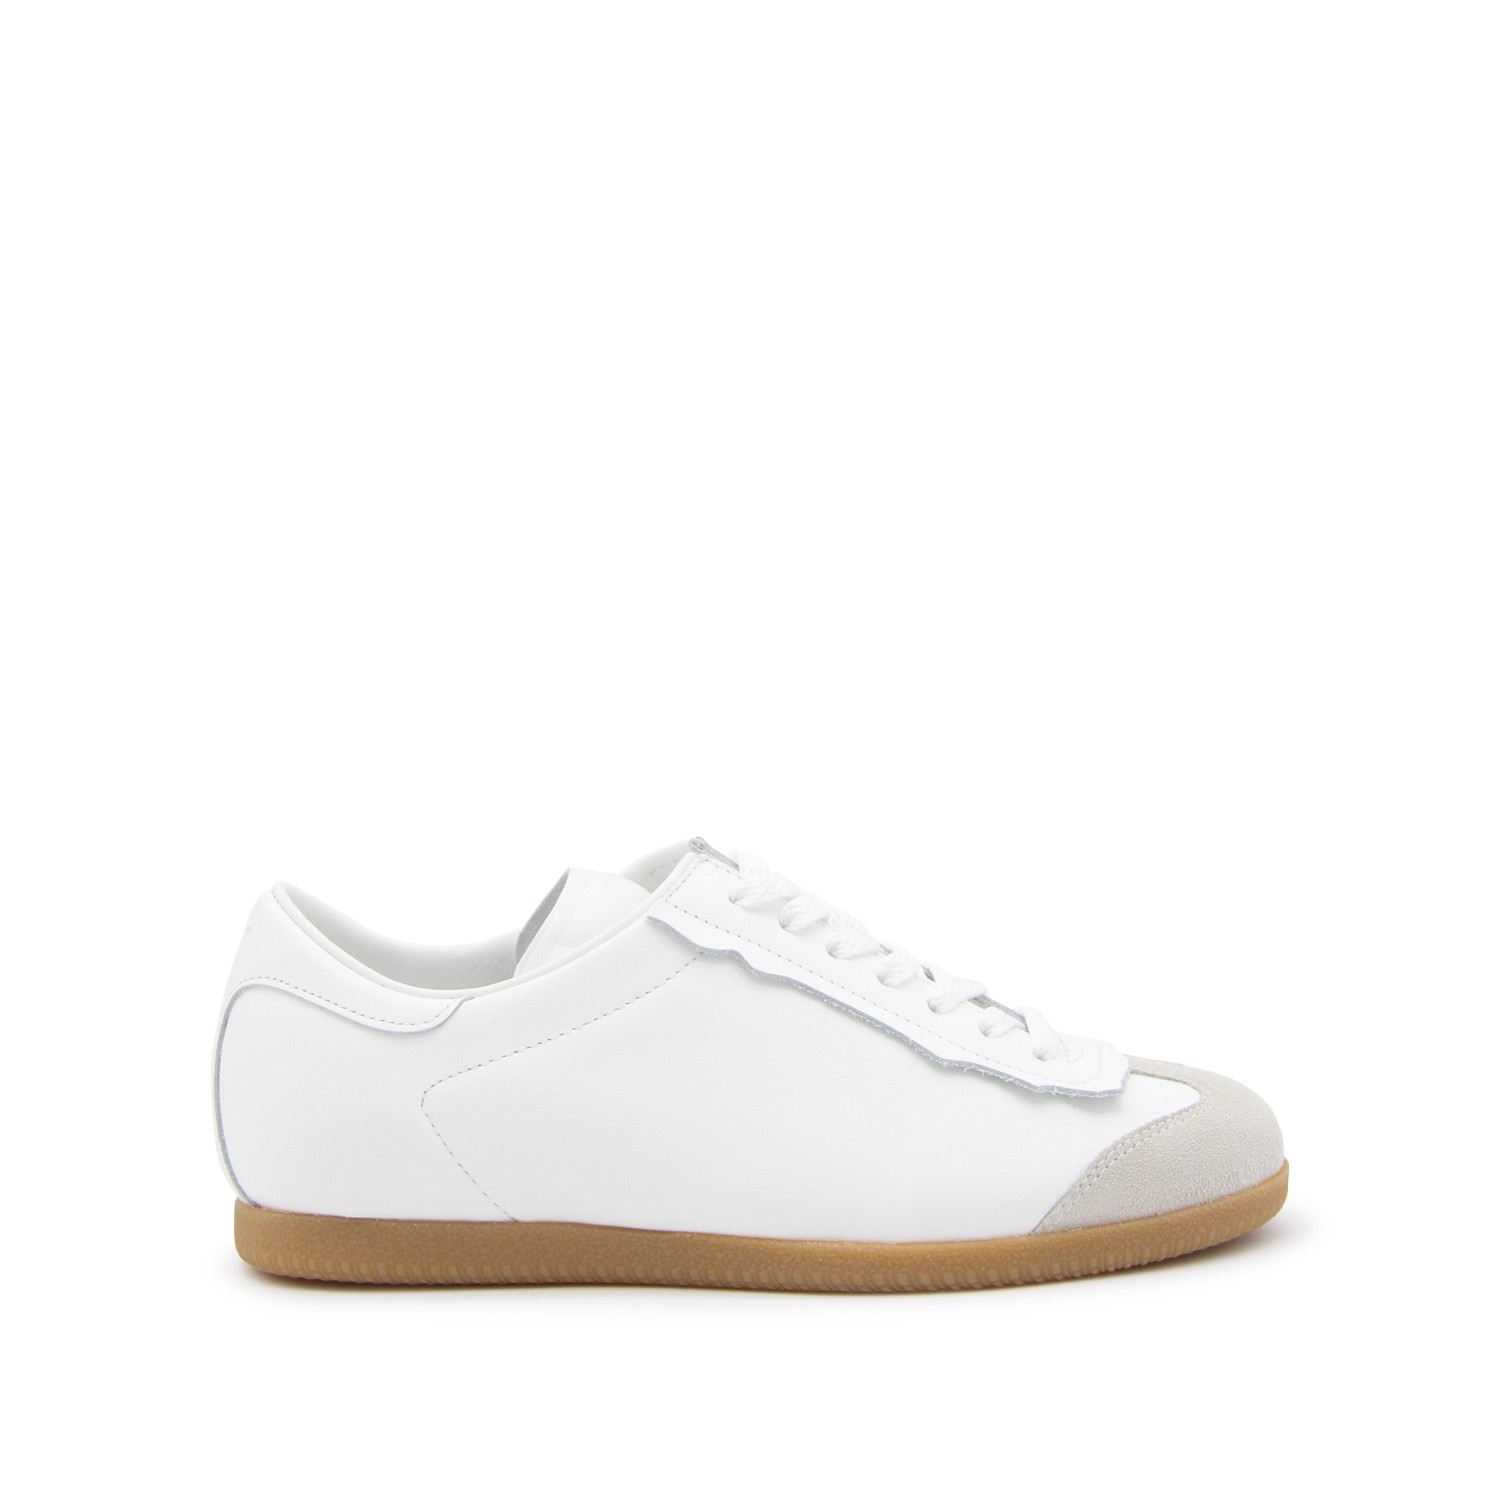 WHITE LEATHER AND GREY SUEDE SNEAKERS - 1